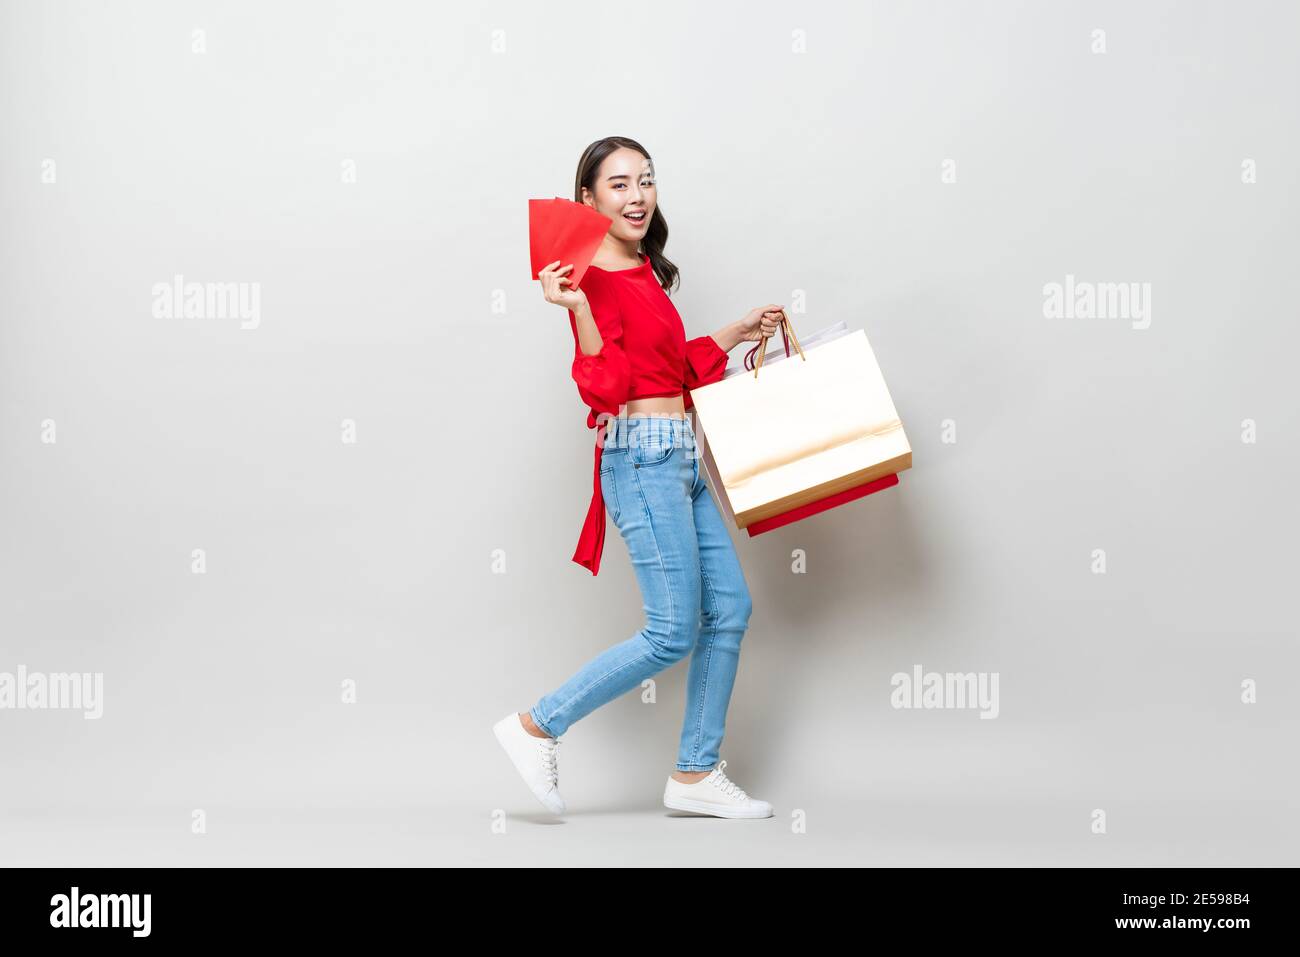 muffled-bat943: a person holding a bunch of red envelopes, instagram  contest winner, gucci, dressed in red paper bags, giving gifts holding  gift, 3 colour, from china, gifts, invitation card, gucci, guccimaze, 1 